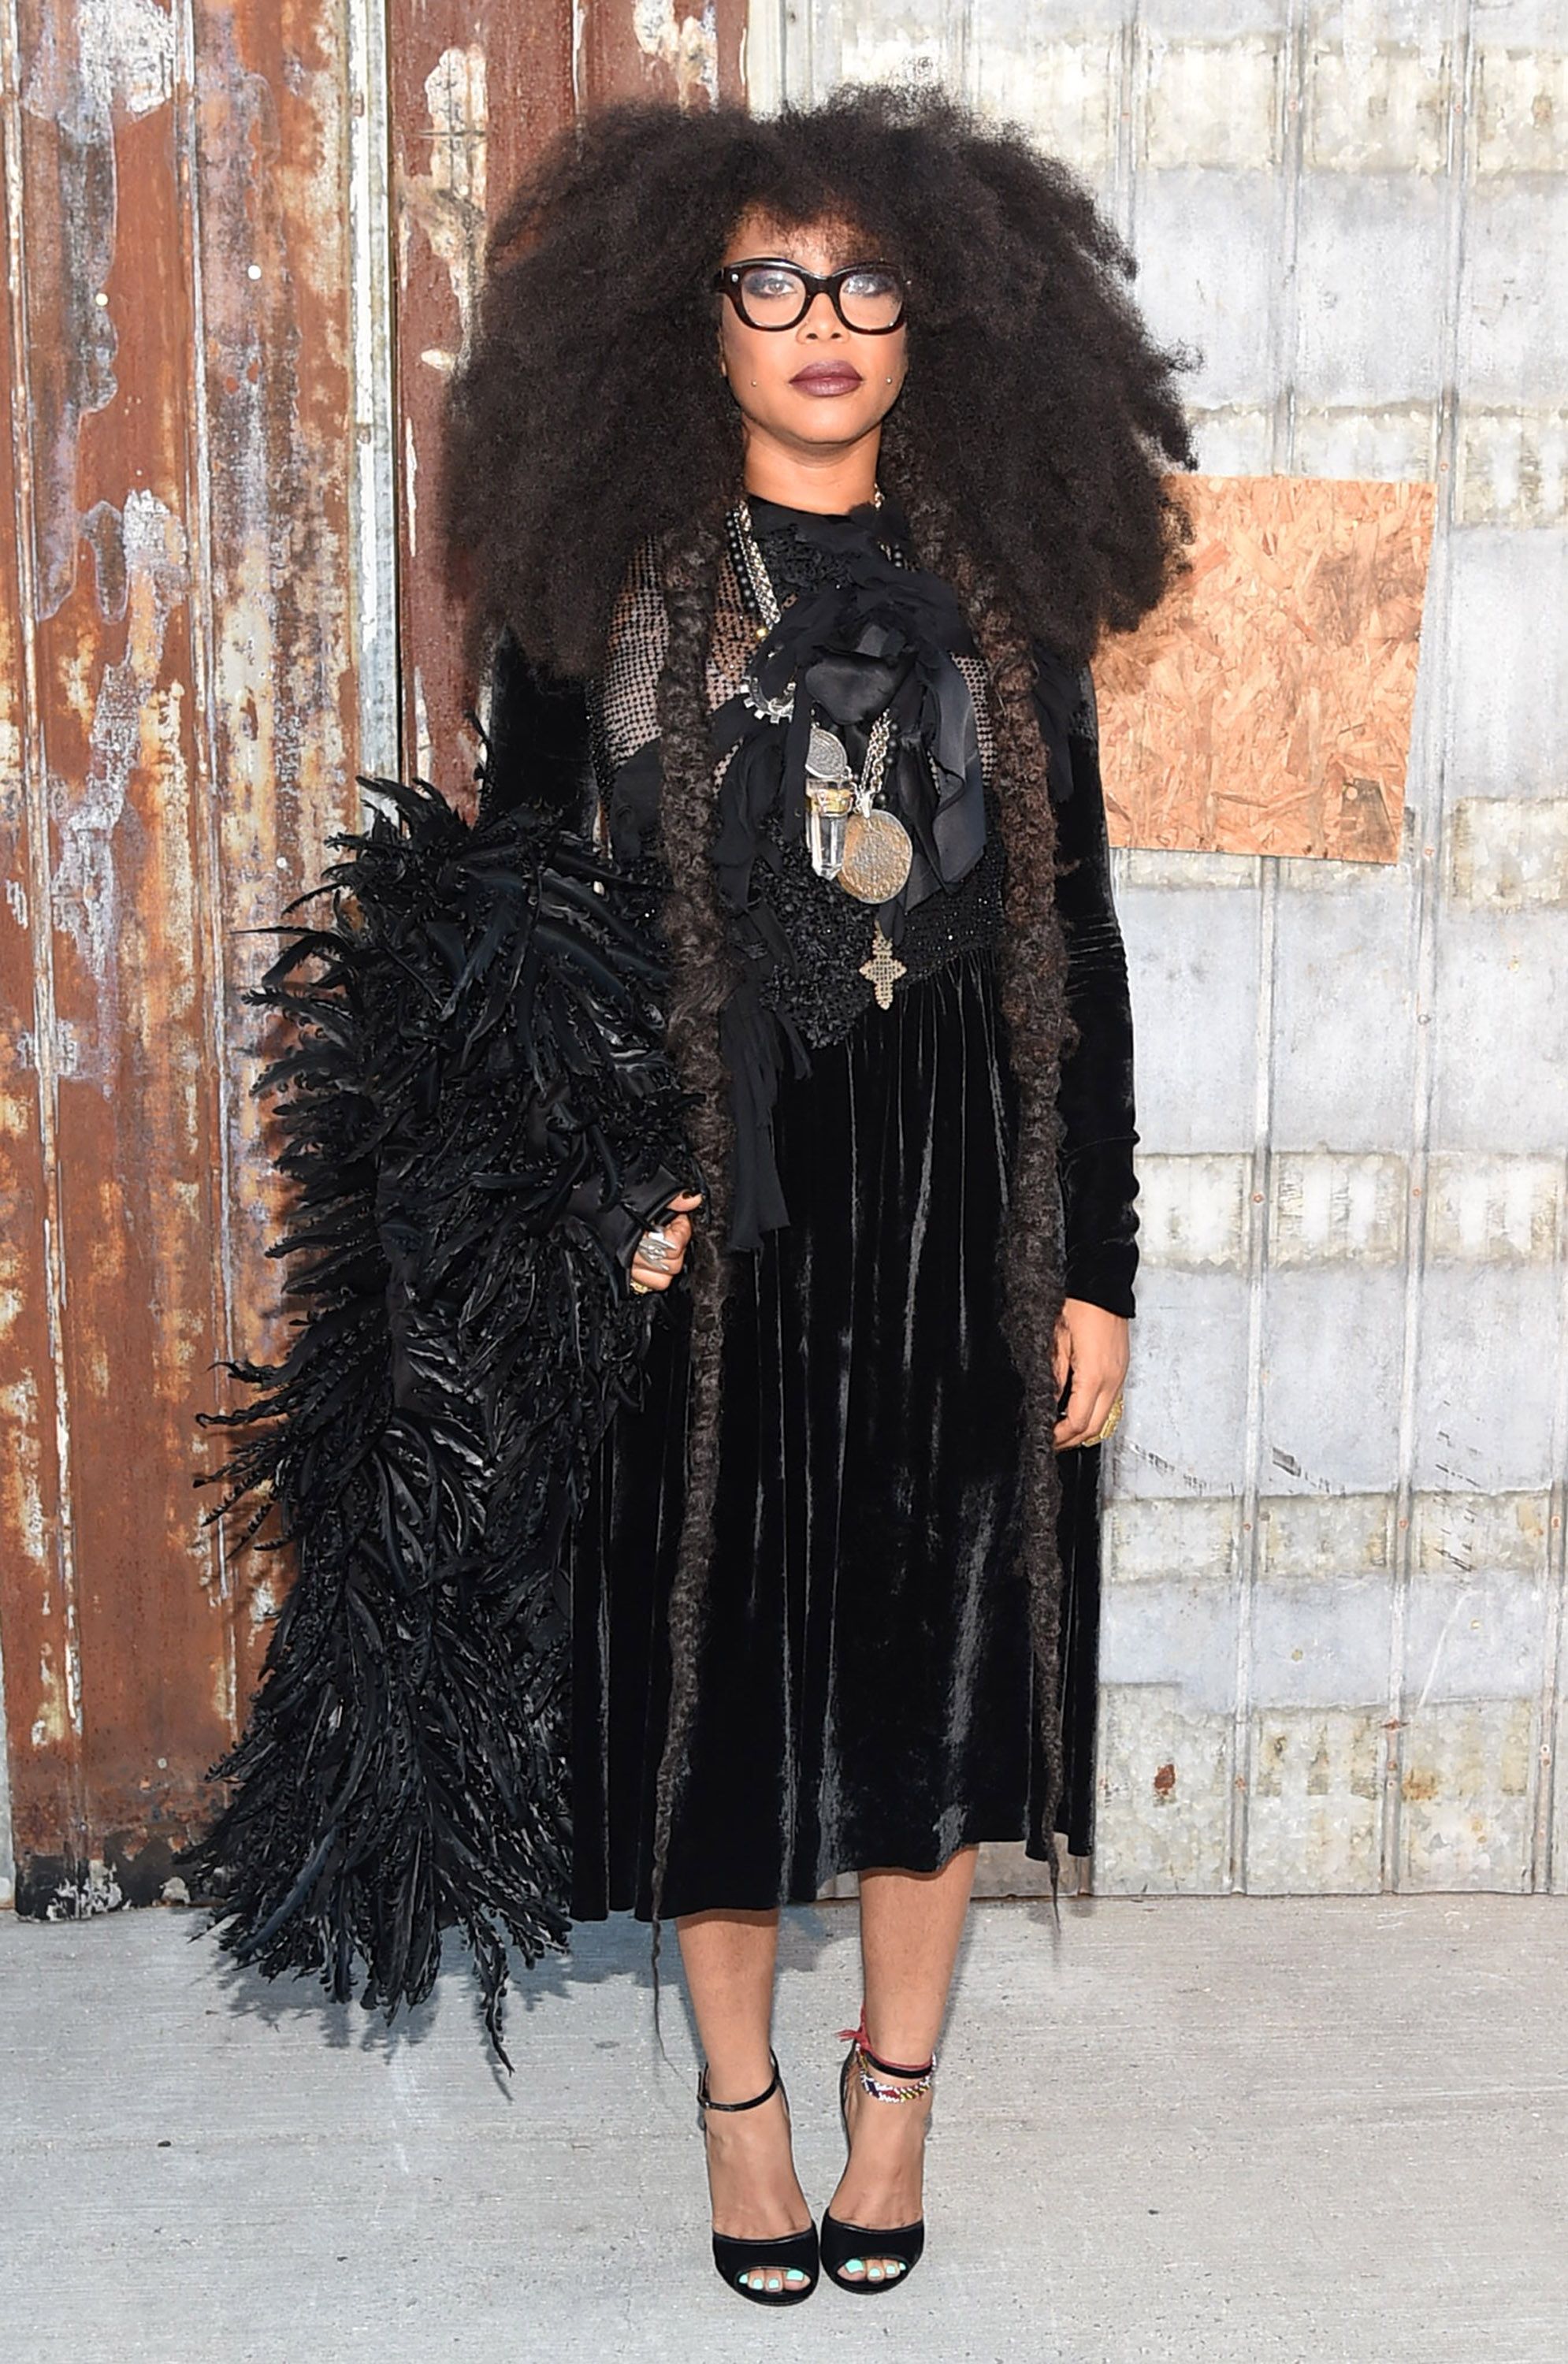  Erykah Badu at the Givenchy fashion show on September 11, 2015 in New York City.  | Photo: Getty Images